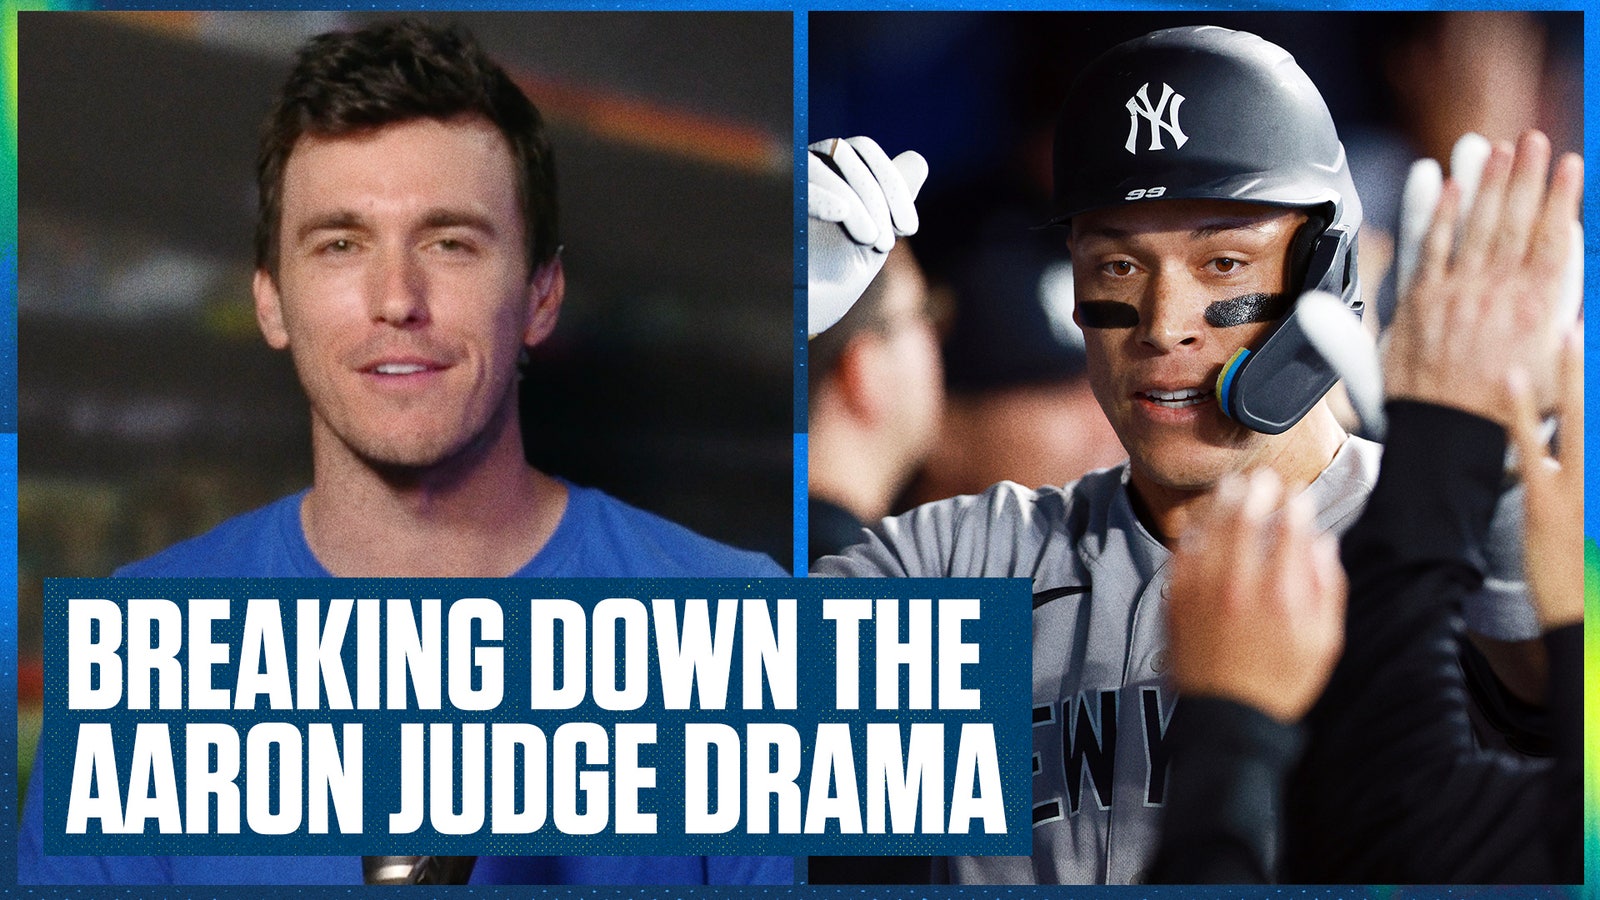 Were Aaron Judge and the Yankees cheating or is it just part of the game?